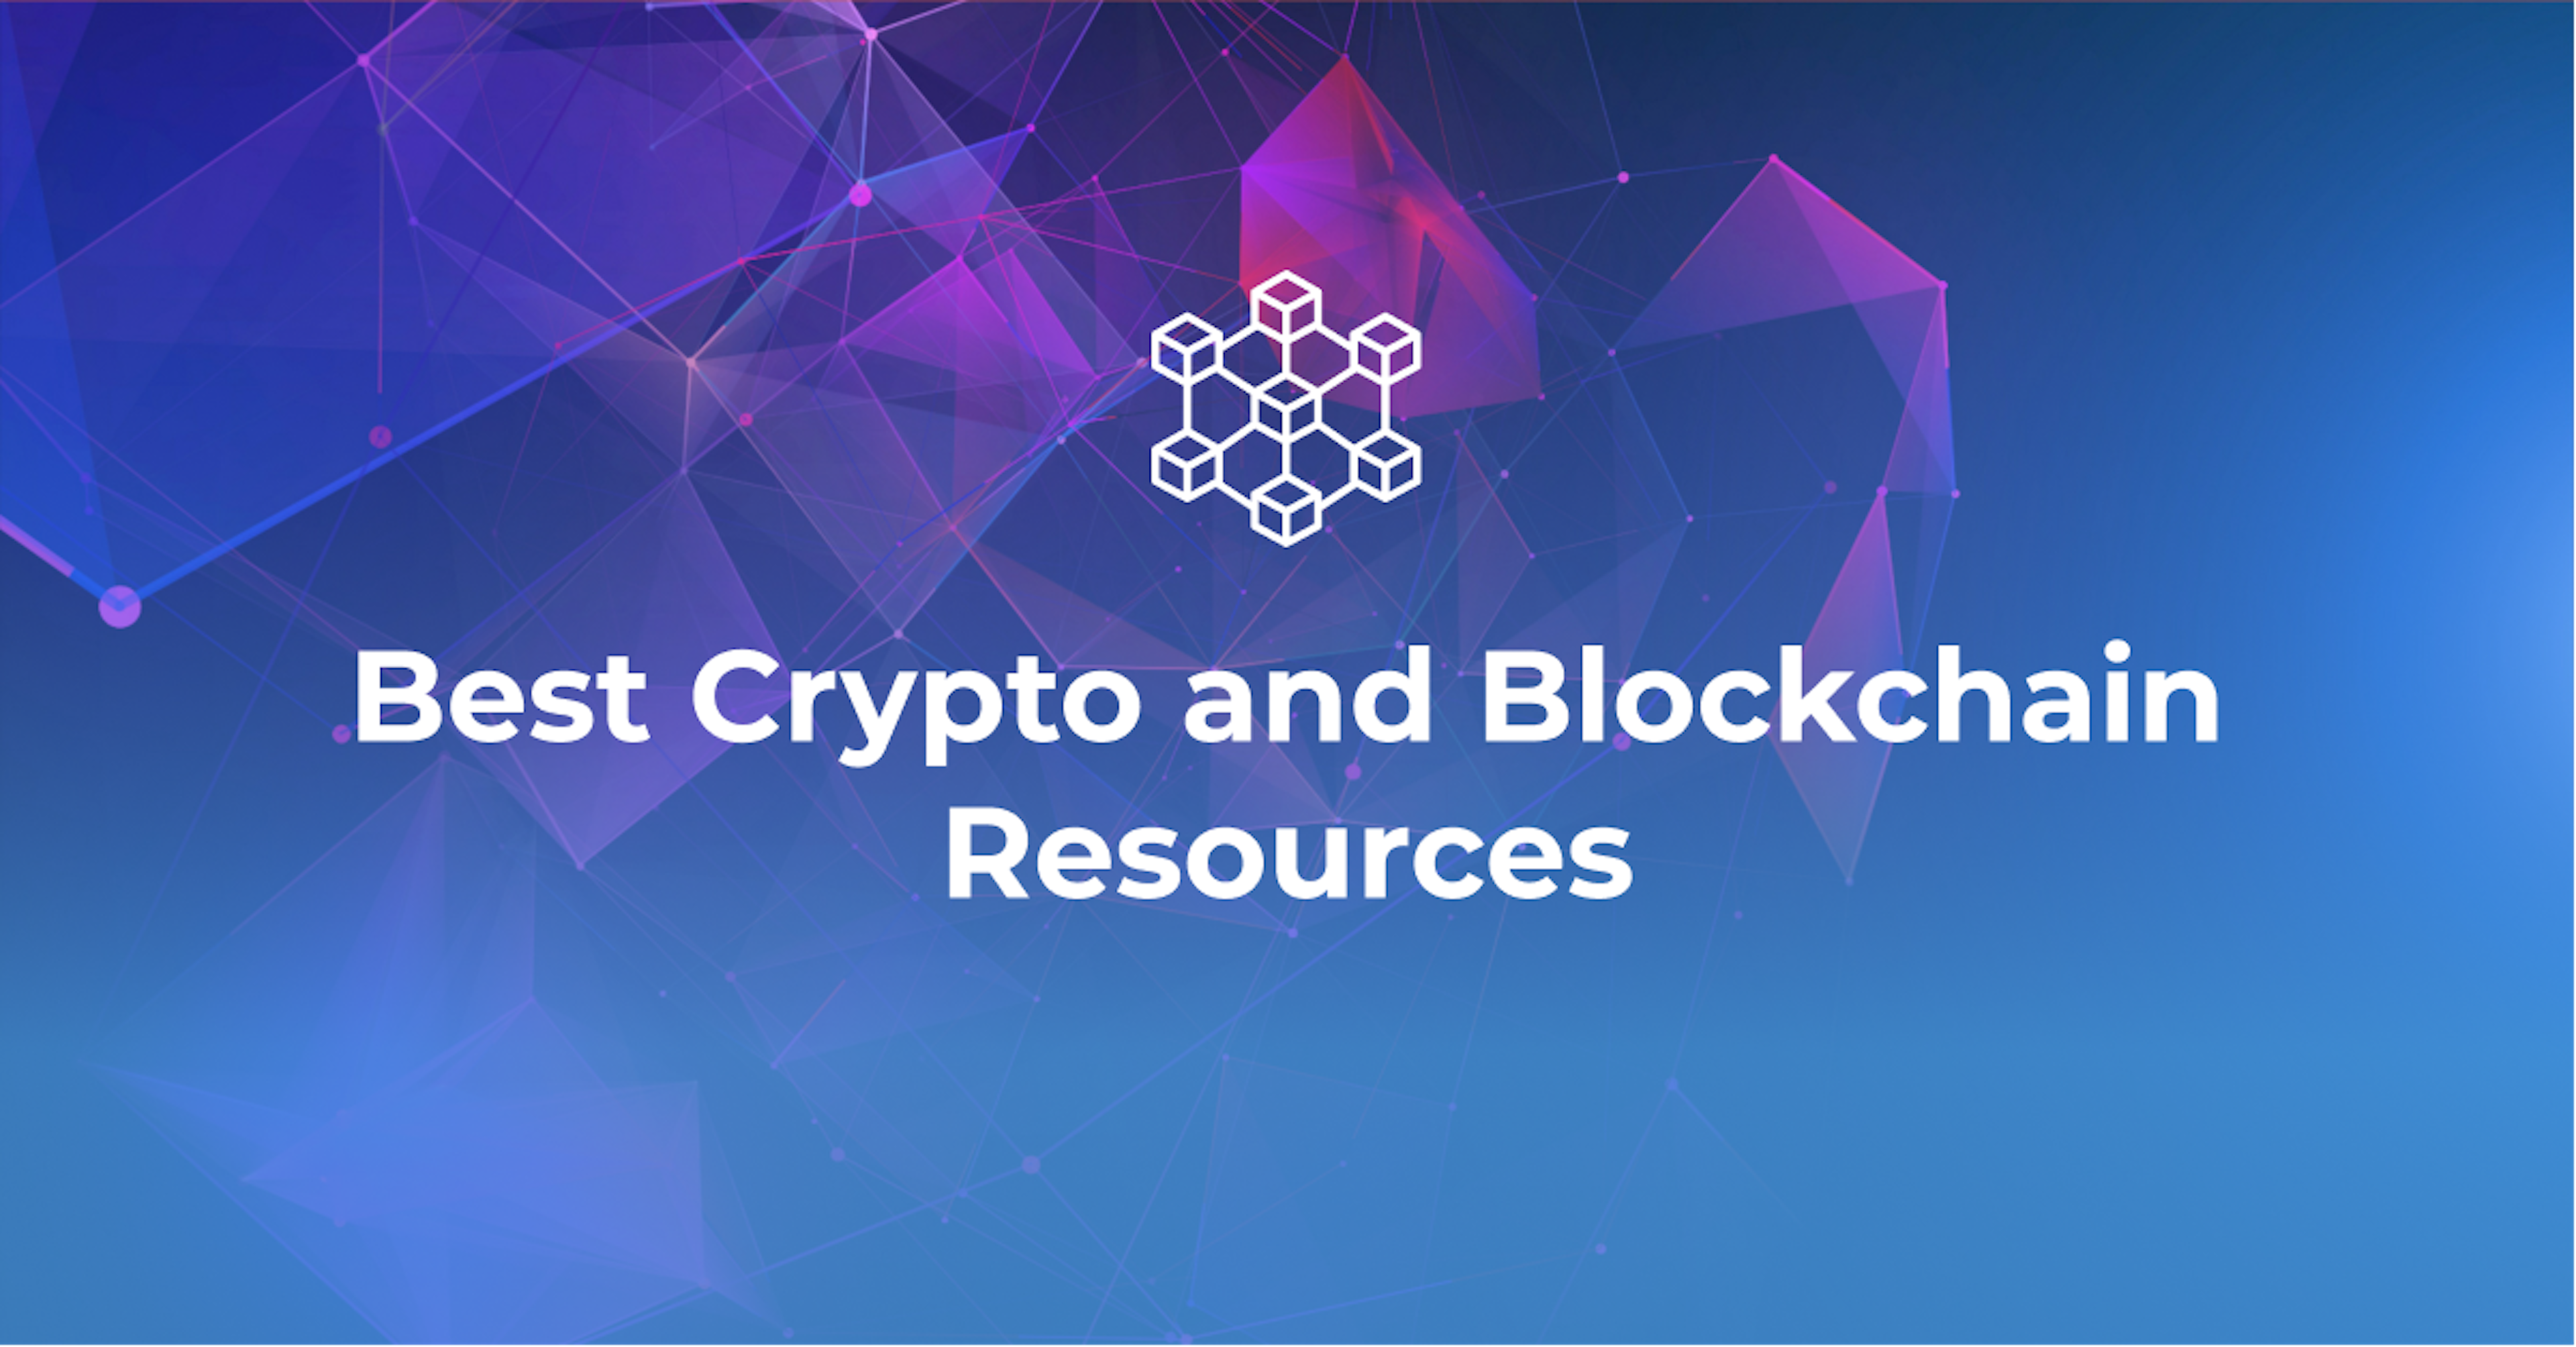 Best Resources to Keep Up With the Crypto and Blockchain Space